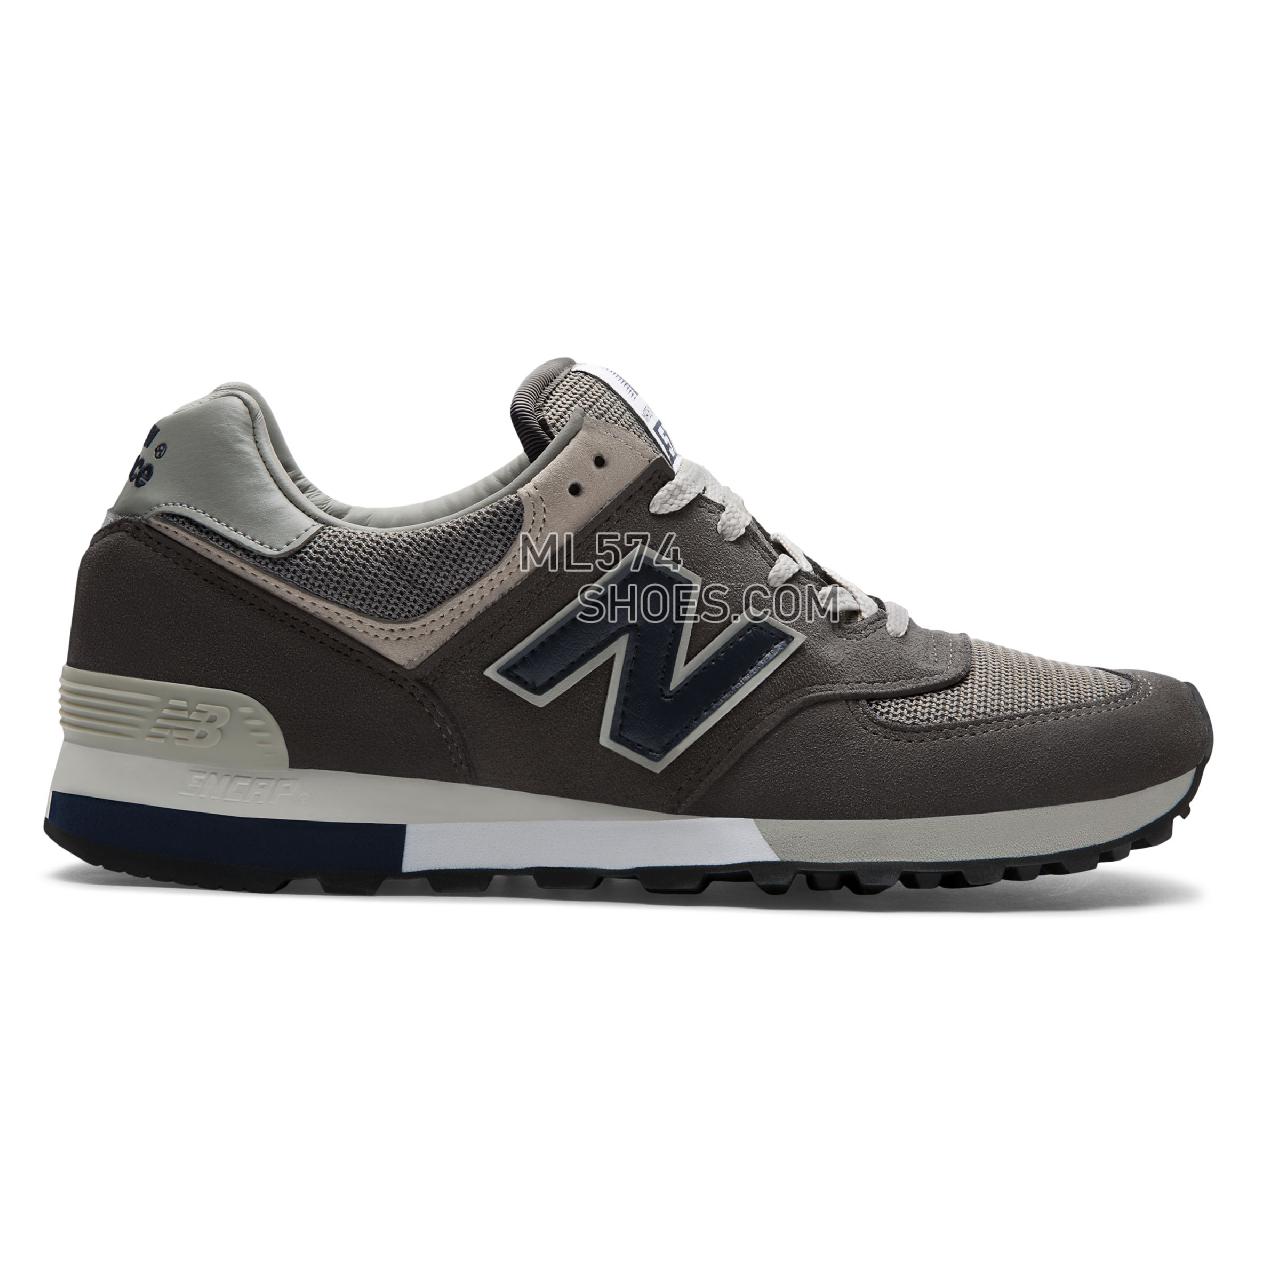 New Balance 576 Made in UK - Men's 576 - Classic Grey with Navy - OM576OGG